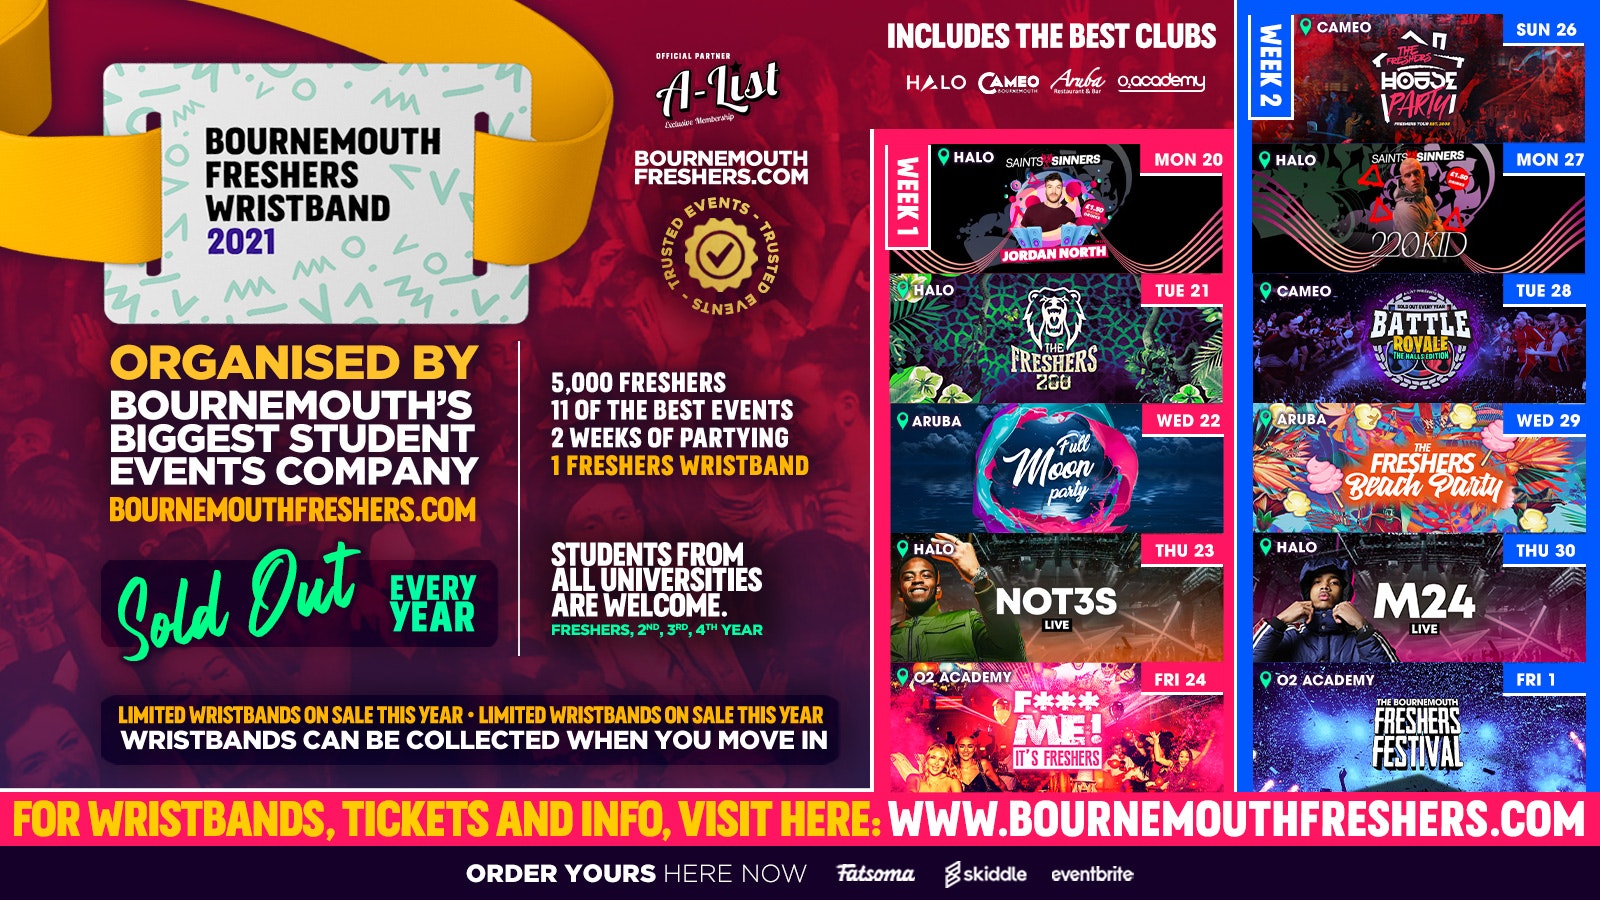 The Bournemouth Freshers Wristband //// Bournemouth Freshers 2021 – ON SALE NOW